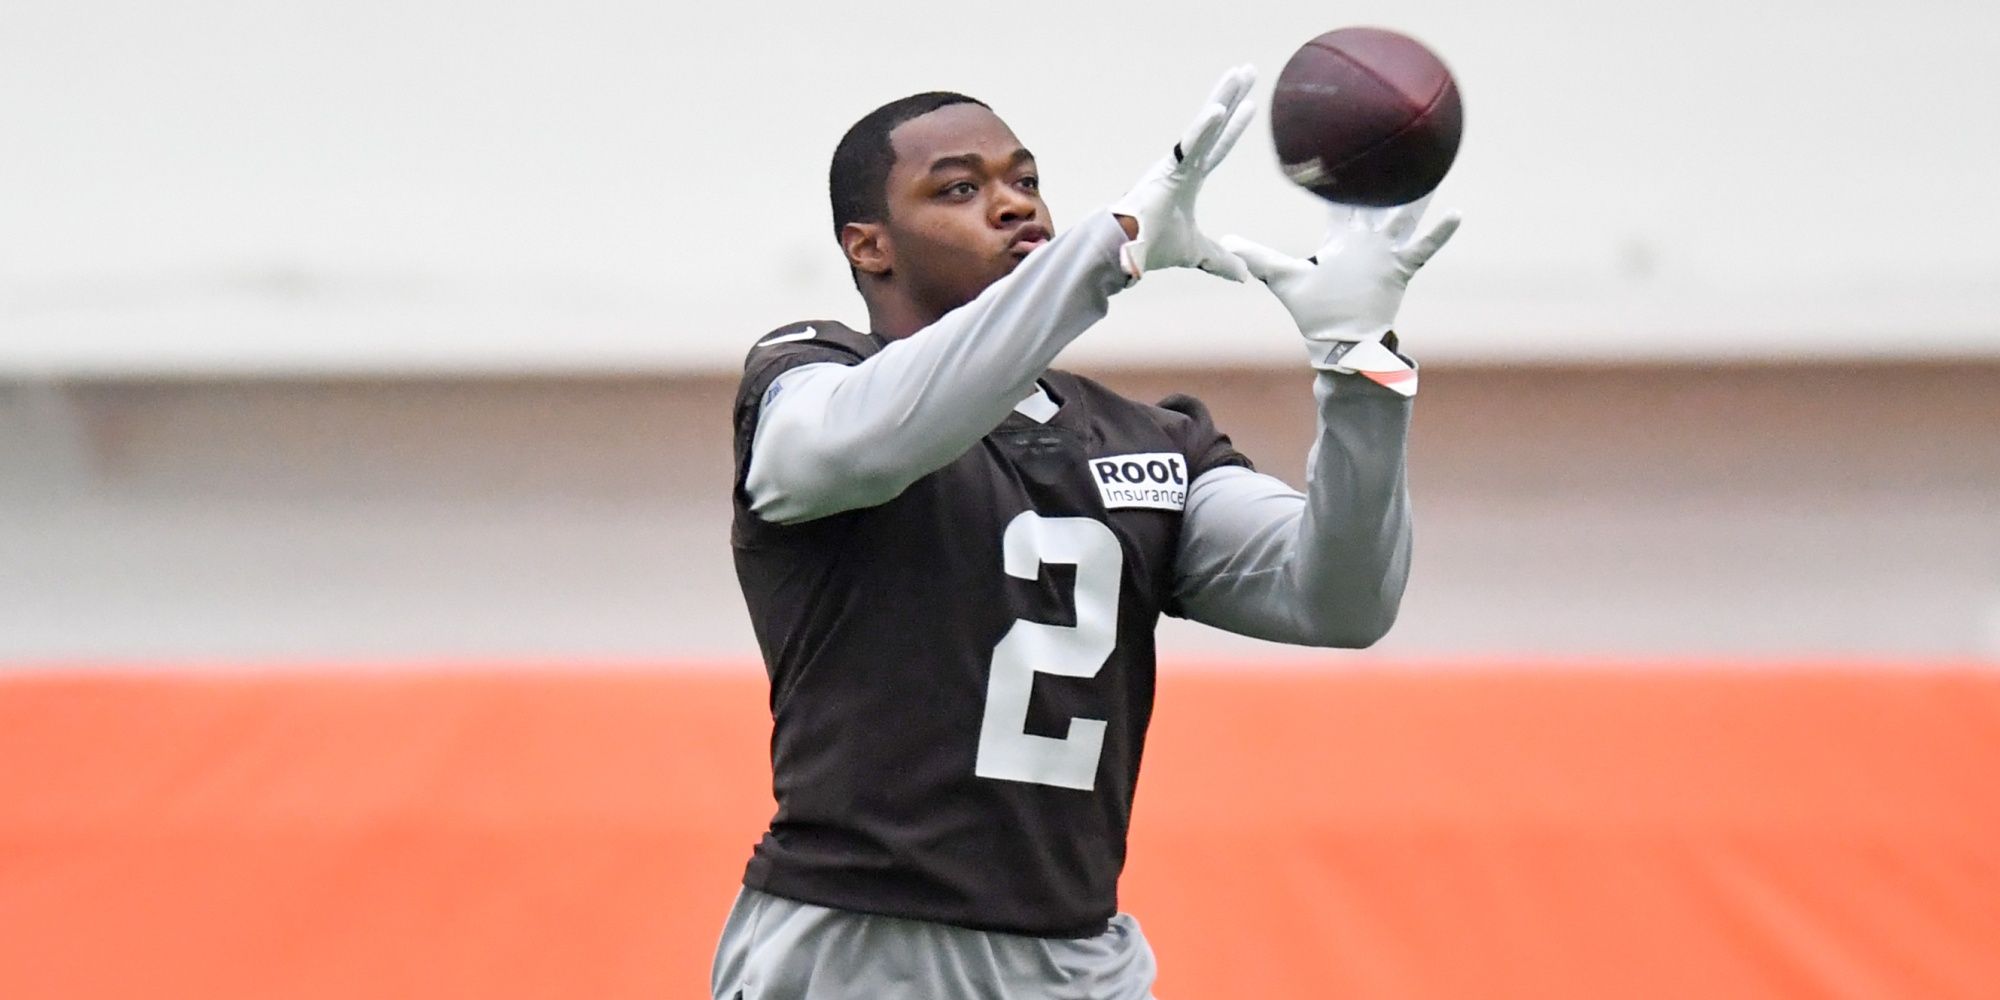 Amari Cooper catching a pass in practice in a brown Browns uniform